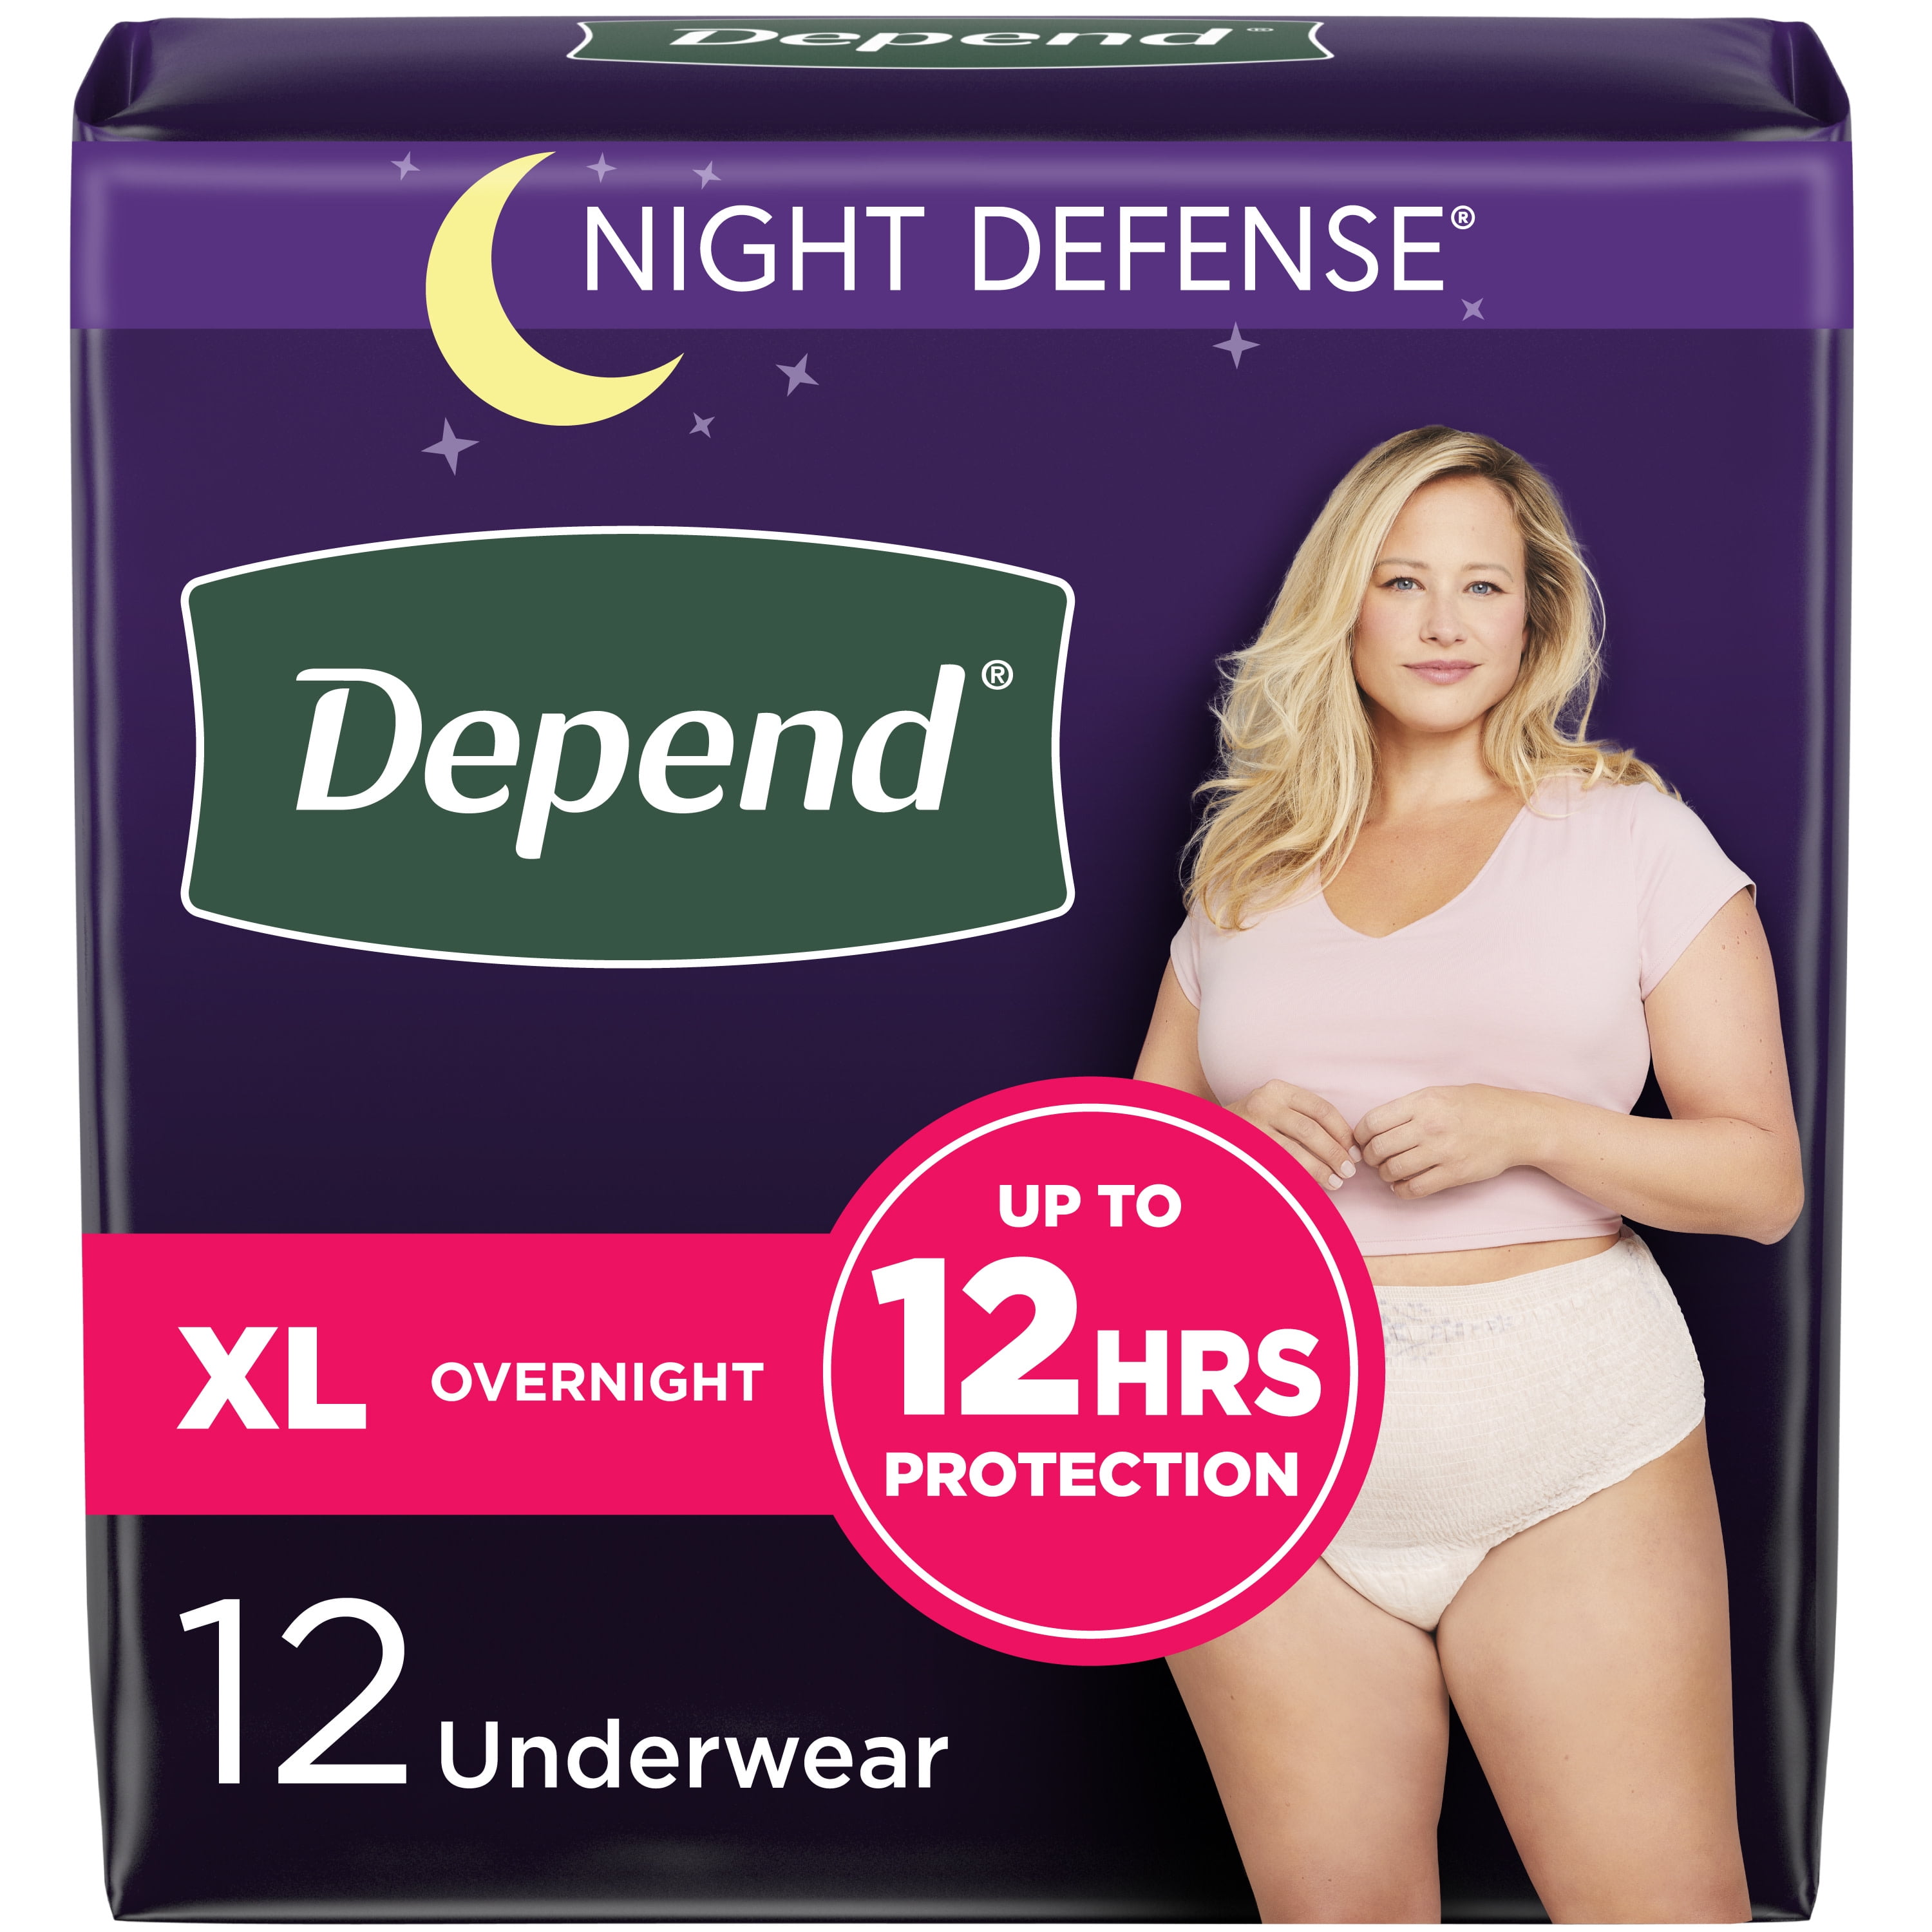 Depend Night Defense Adult Incontinence Disposable Overnight Size XL Blush  Underwear For Women, 12 count - Fry's Food Stores